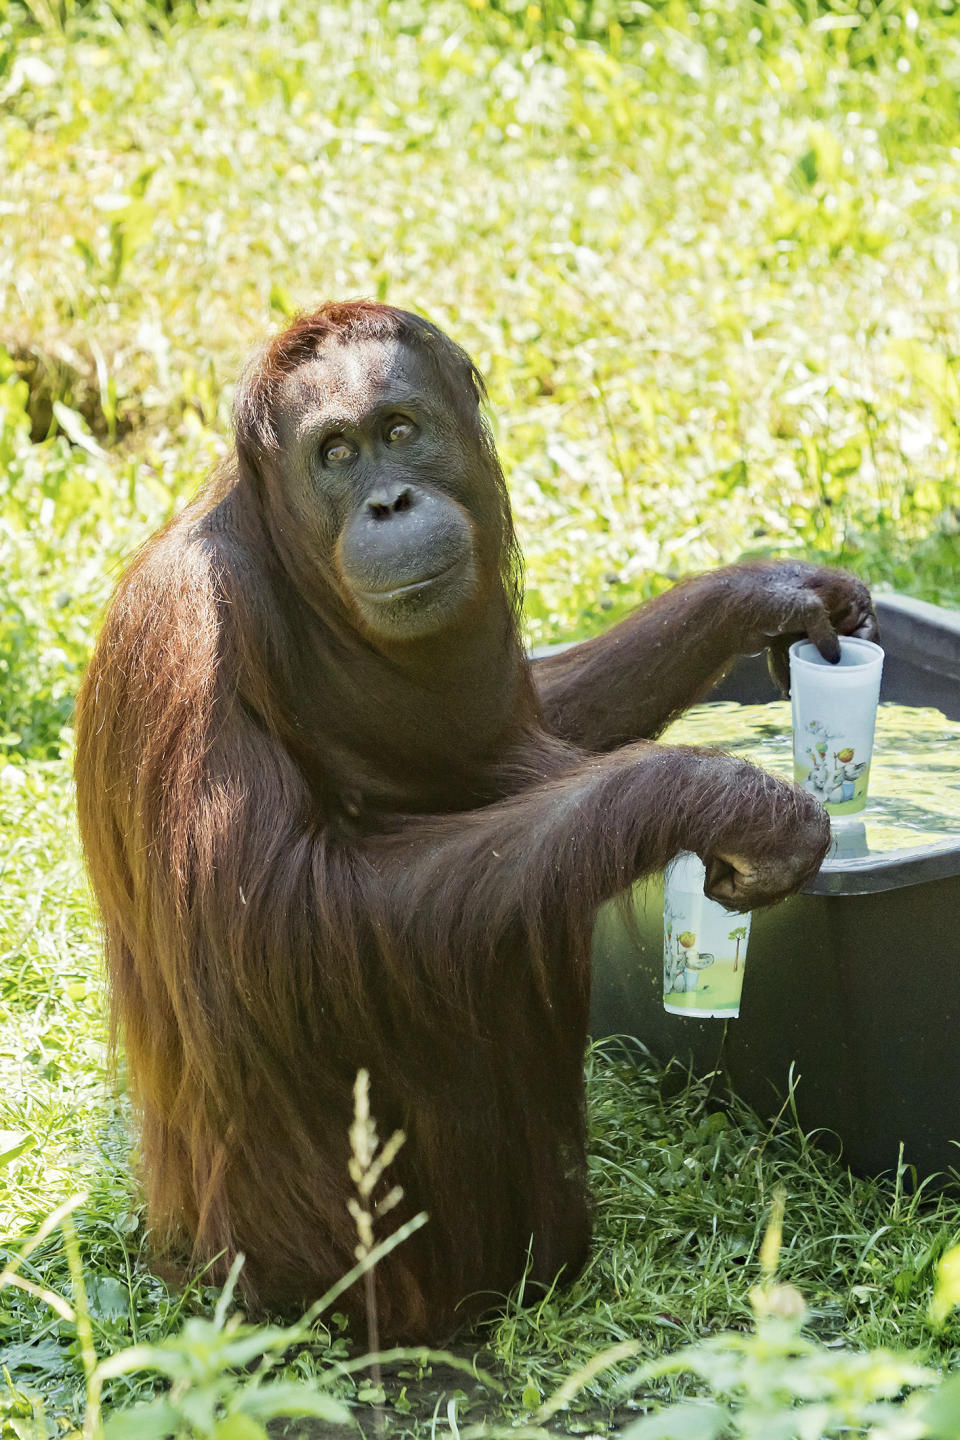 HANDOUT - An orang-utan fills his cups with water at the zoo Schoenbrunn in Vienna, Austria, Tuesday, June 25, 2019. Europe is facing a heatwave with temperatures up to 40 degrees. (Daniel Zupanc/Vienna Zoo via AP)